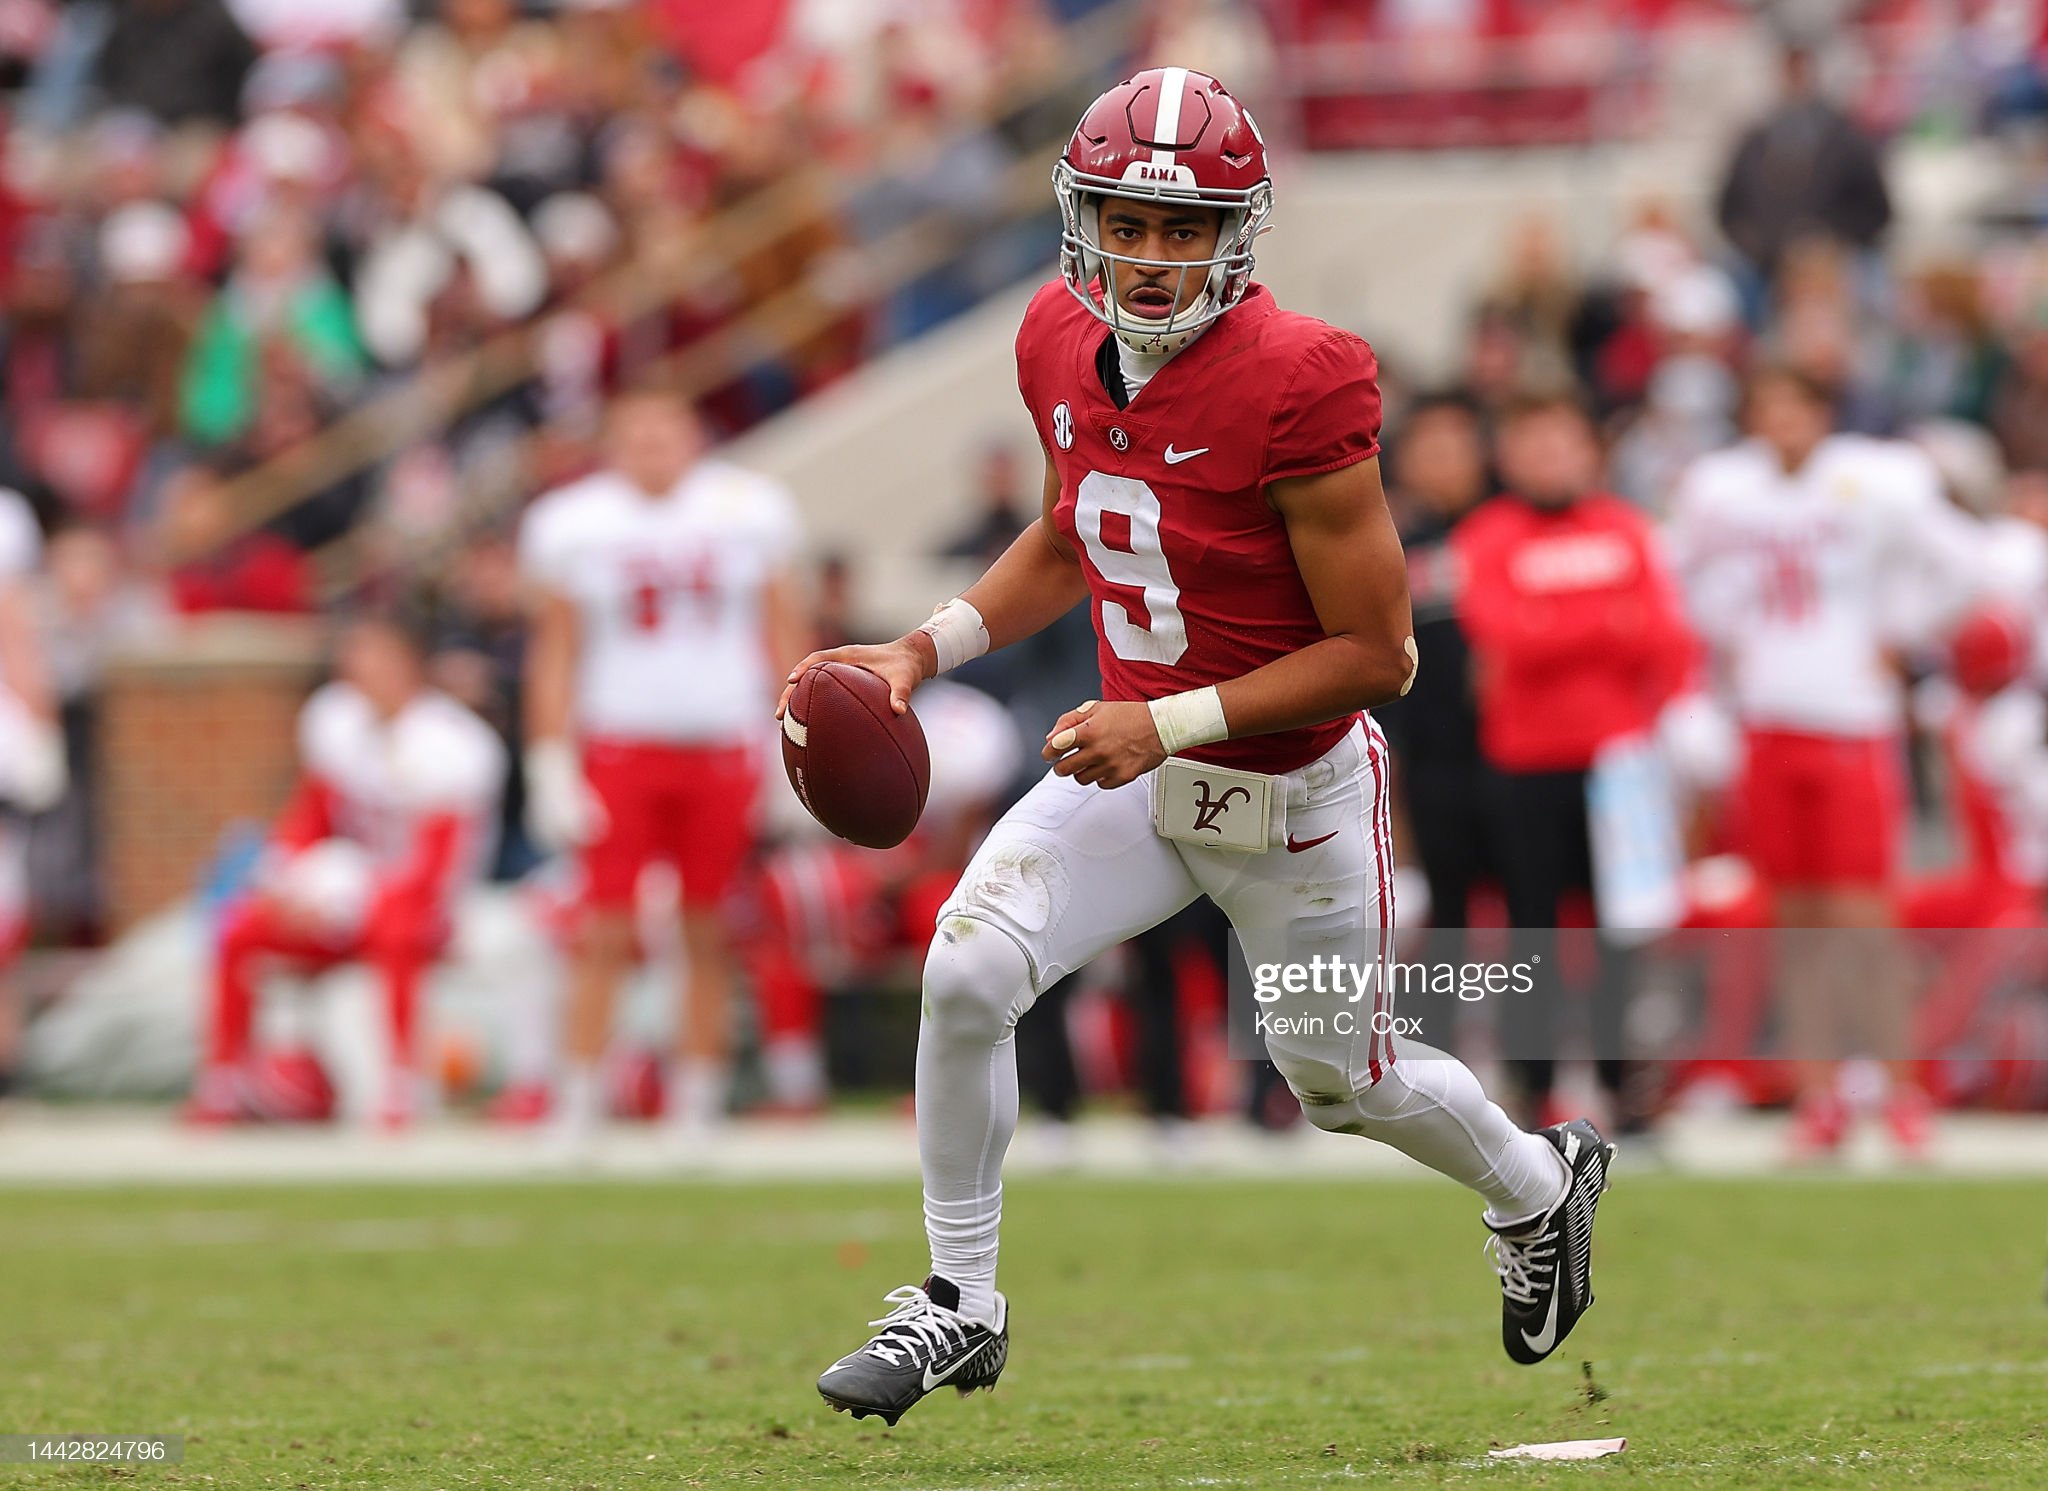 2023 NFL Draft Scouting Reports: QB Bryce Young, Alabama